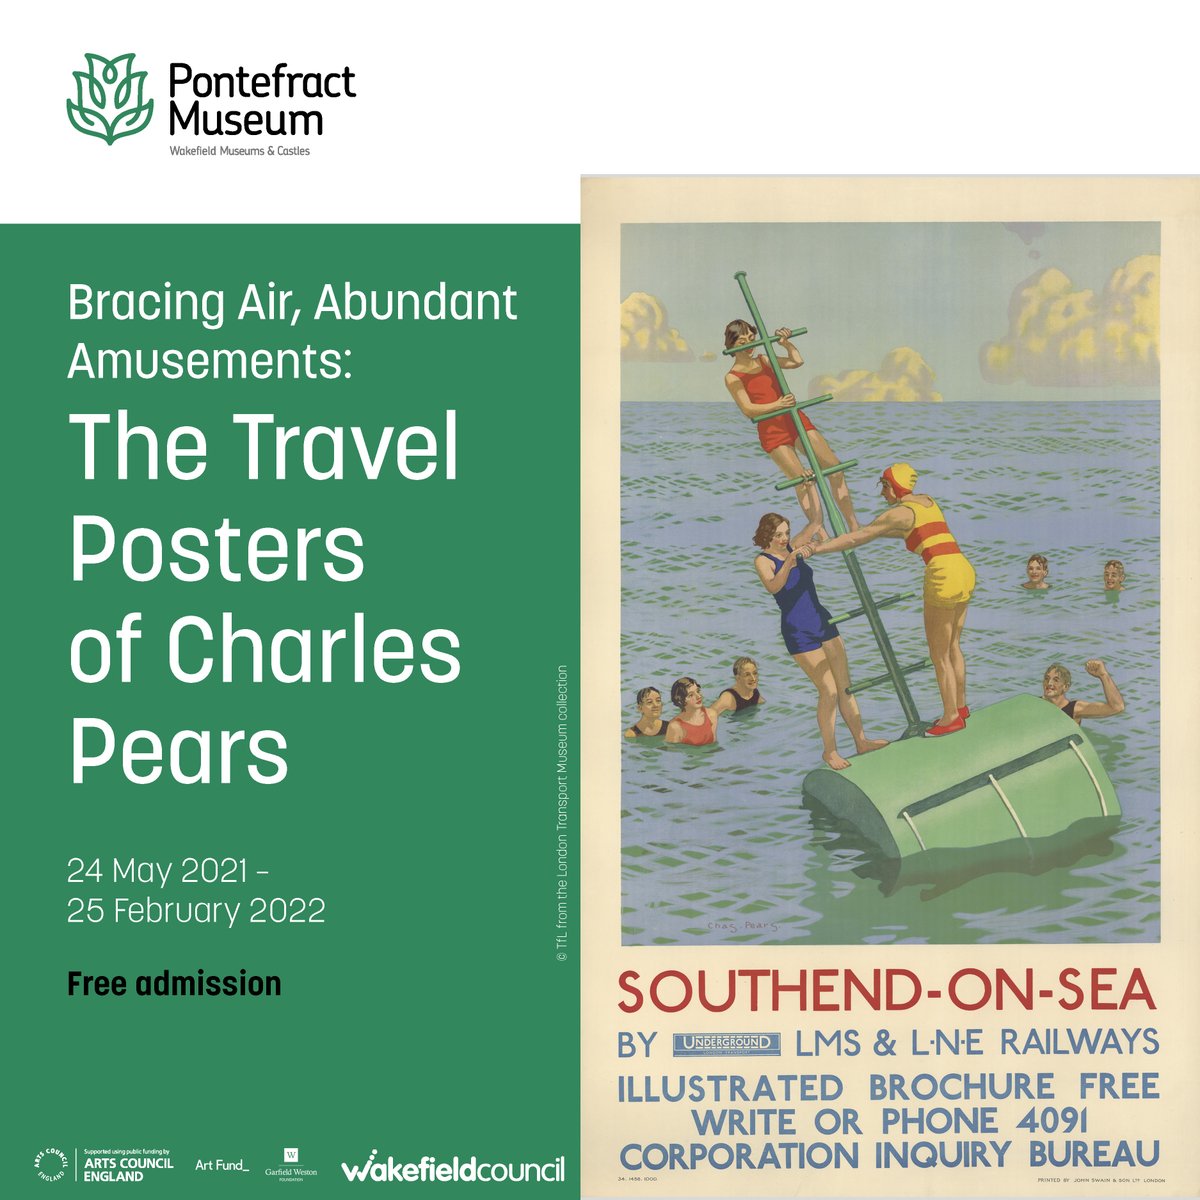 Who's going to the coast over the Bank Holiday? Brits have loved to be beside the seaside for a long time. But if you can't get to the beach today, why not head to #Pontefract Museum instead - our vintage travel poster exhibition is full of sun and sand! expwake.co/CharlesPears